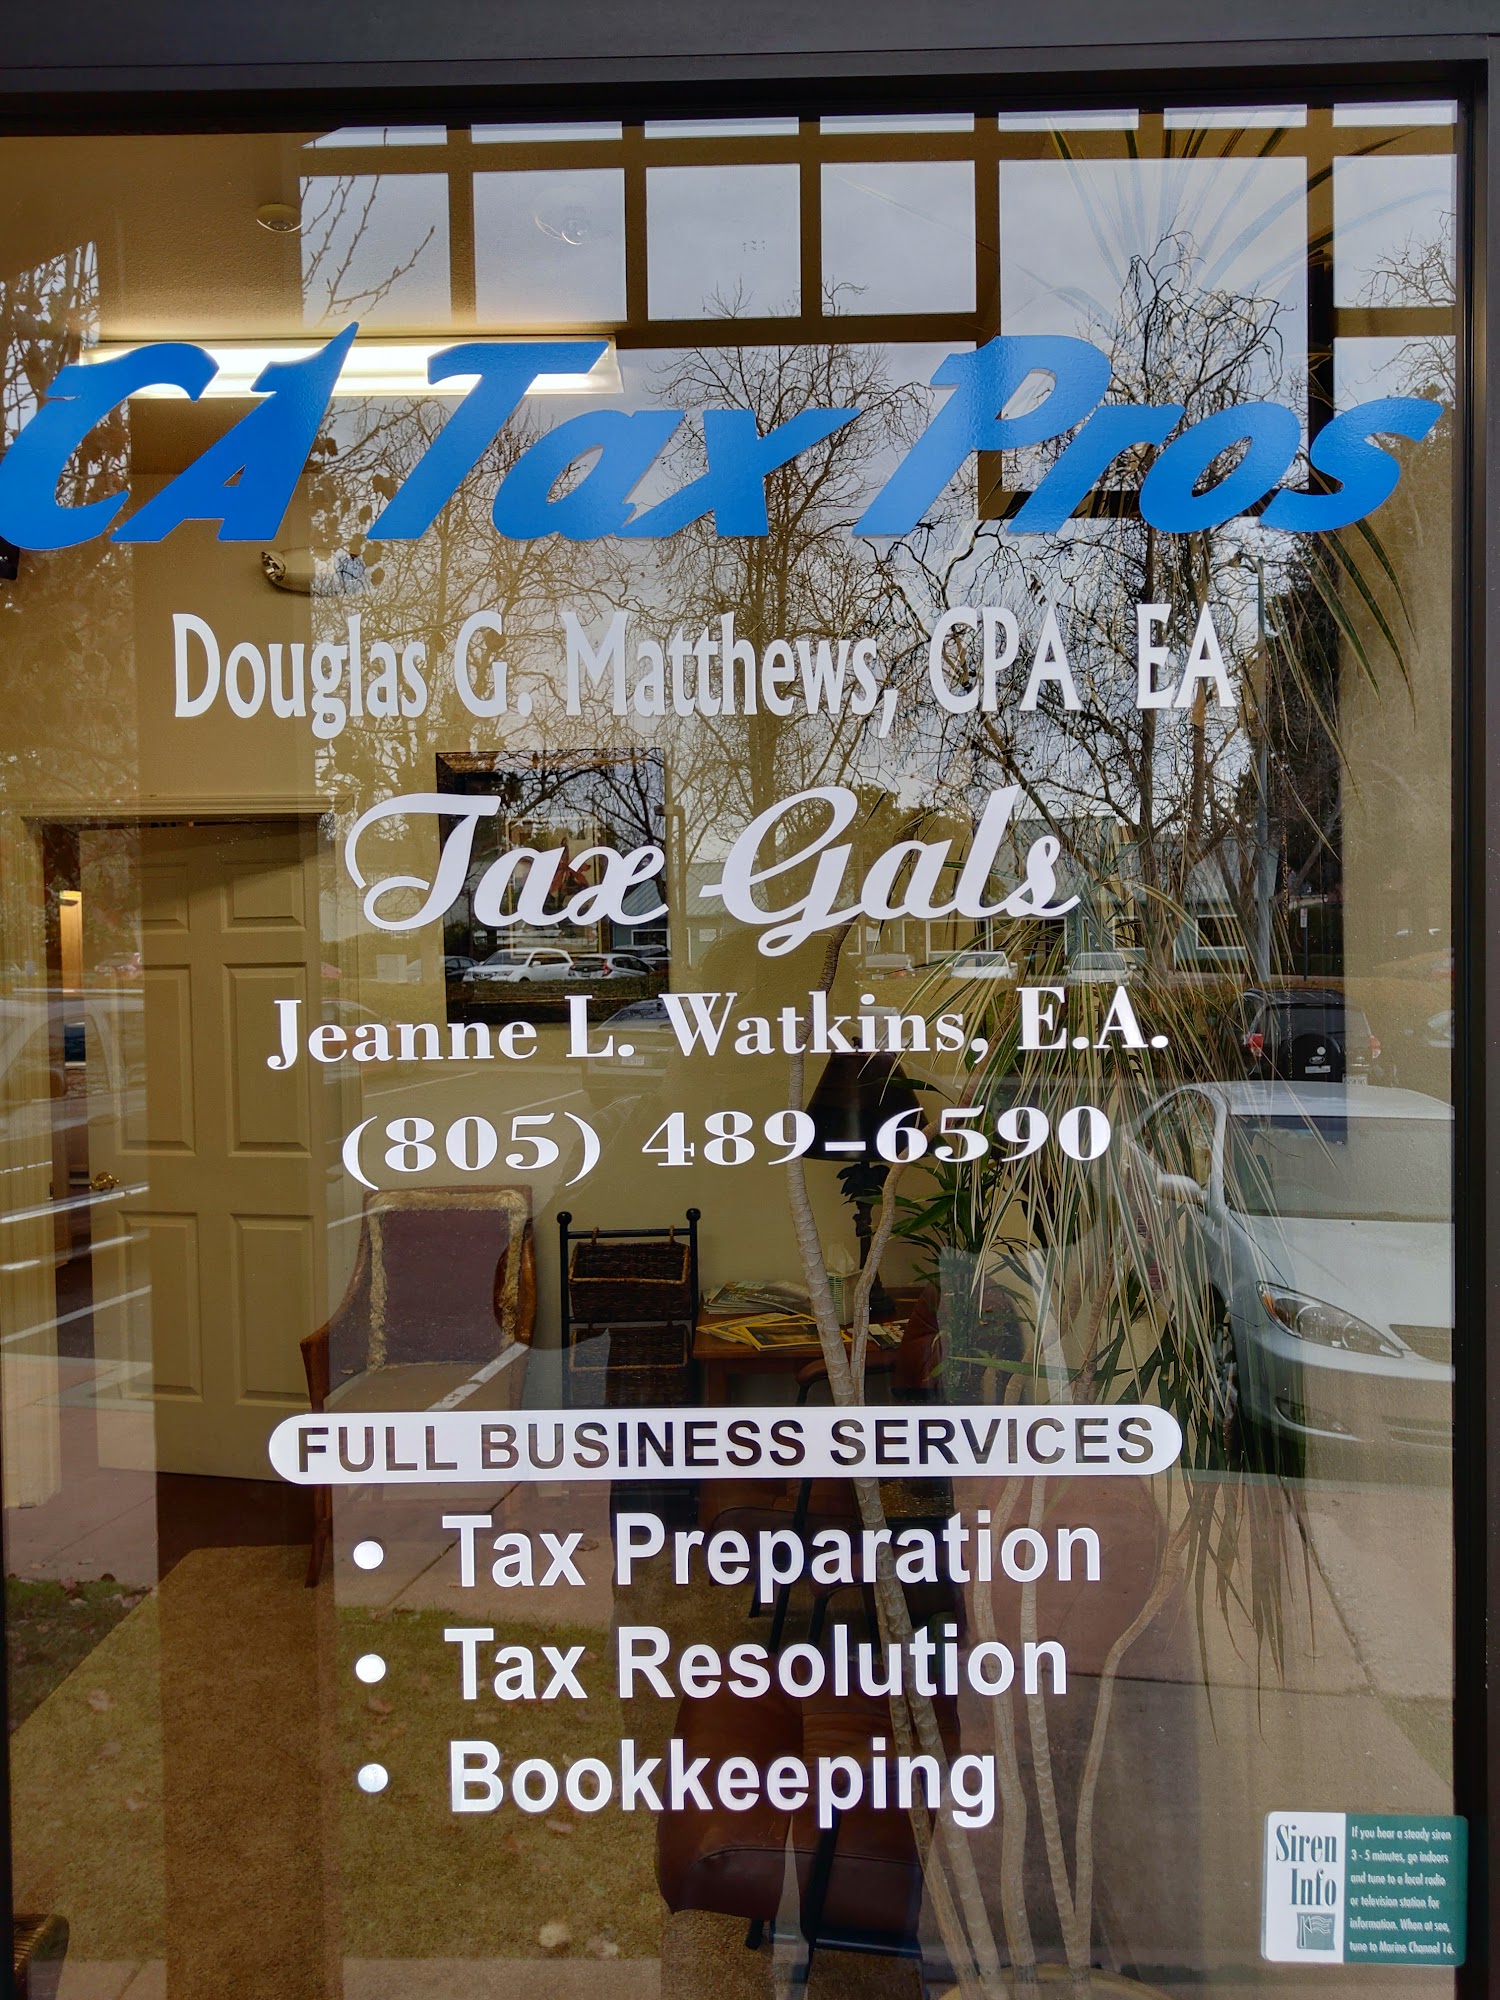 CA Tax Pros, formerly The Tax Gals, Inc.